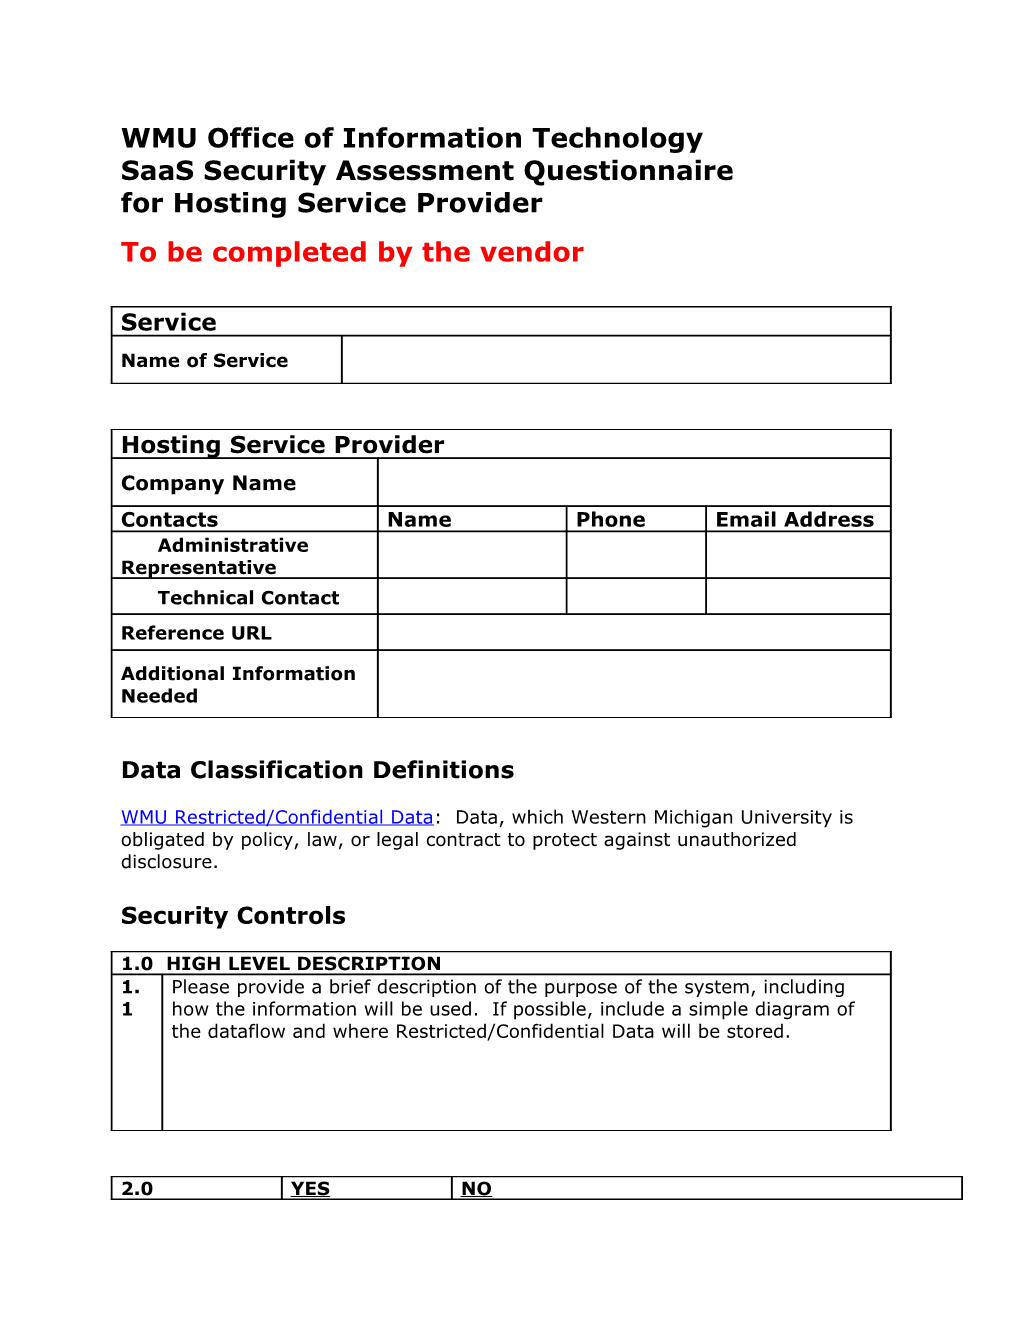 WMU Office of Information Technology Saas Security Assessment Questionnaire for Hosting